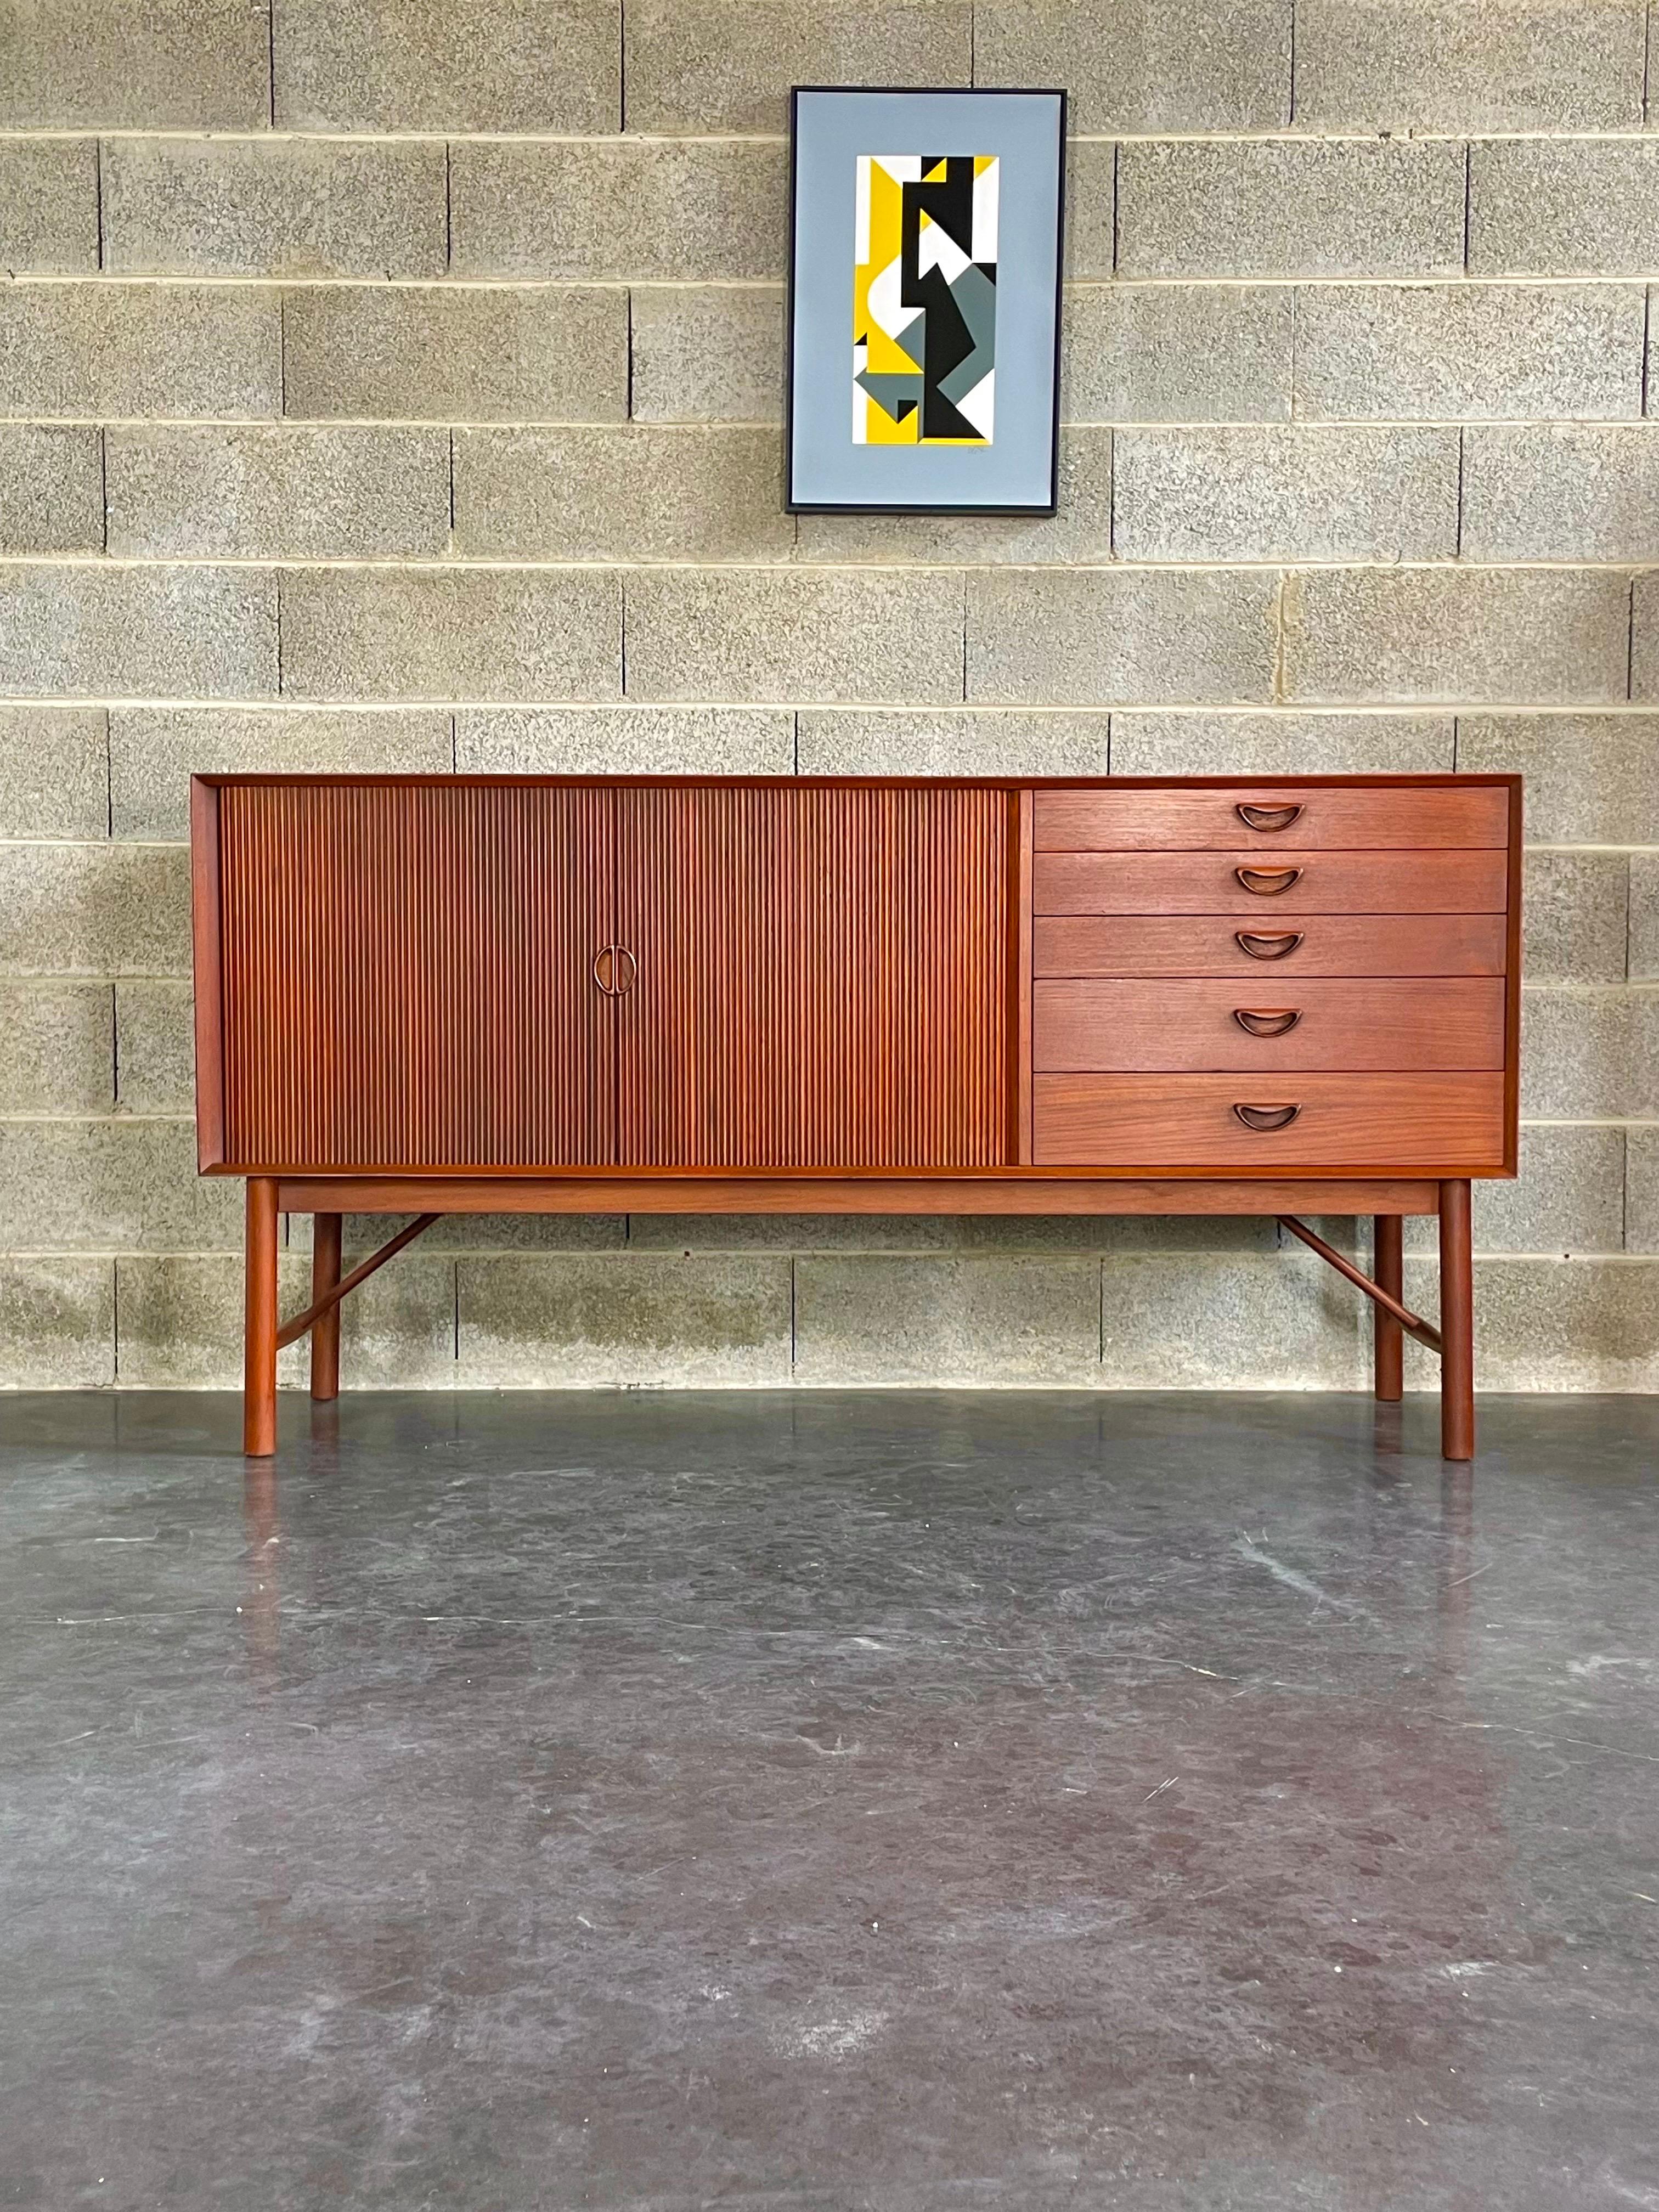 This Danish sideboard model 309C is a true design classic designed by the Danish architects Peter Hvidt & Orla Mølgaard Nielsen. It was produced in Denmark by Søborg Møbelfabrik during the 1950's. This is a rare piece made of solid teak wood. The